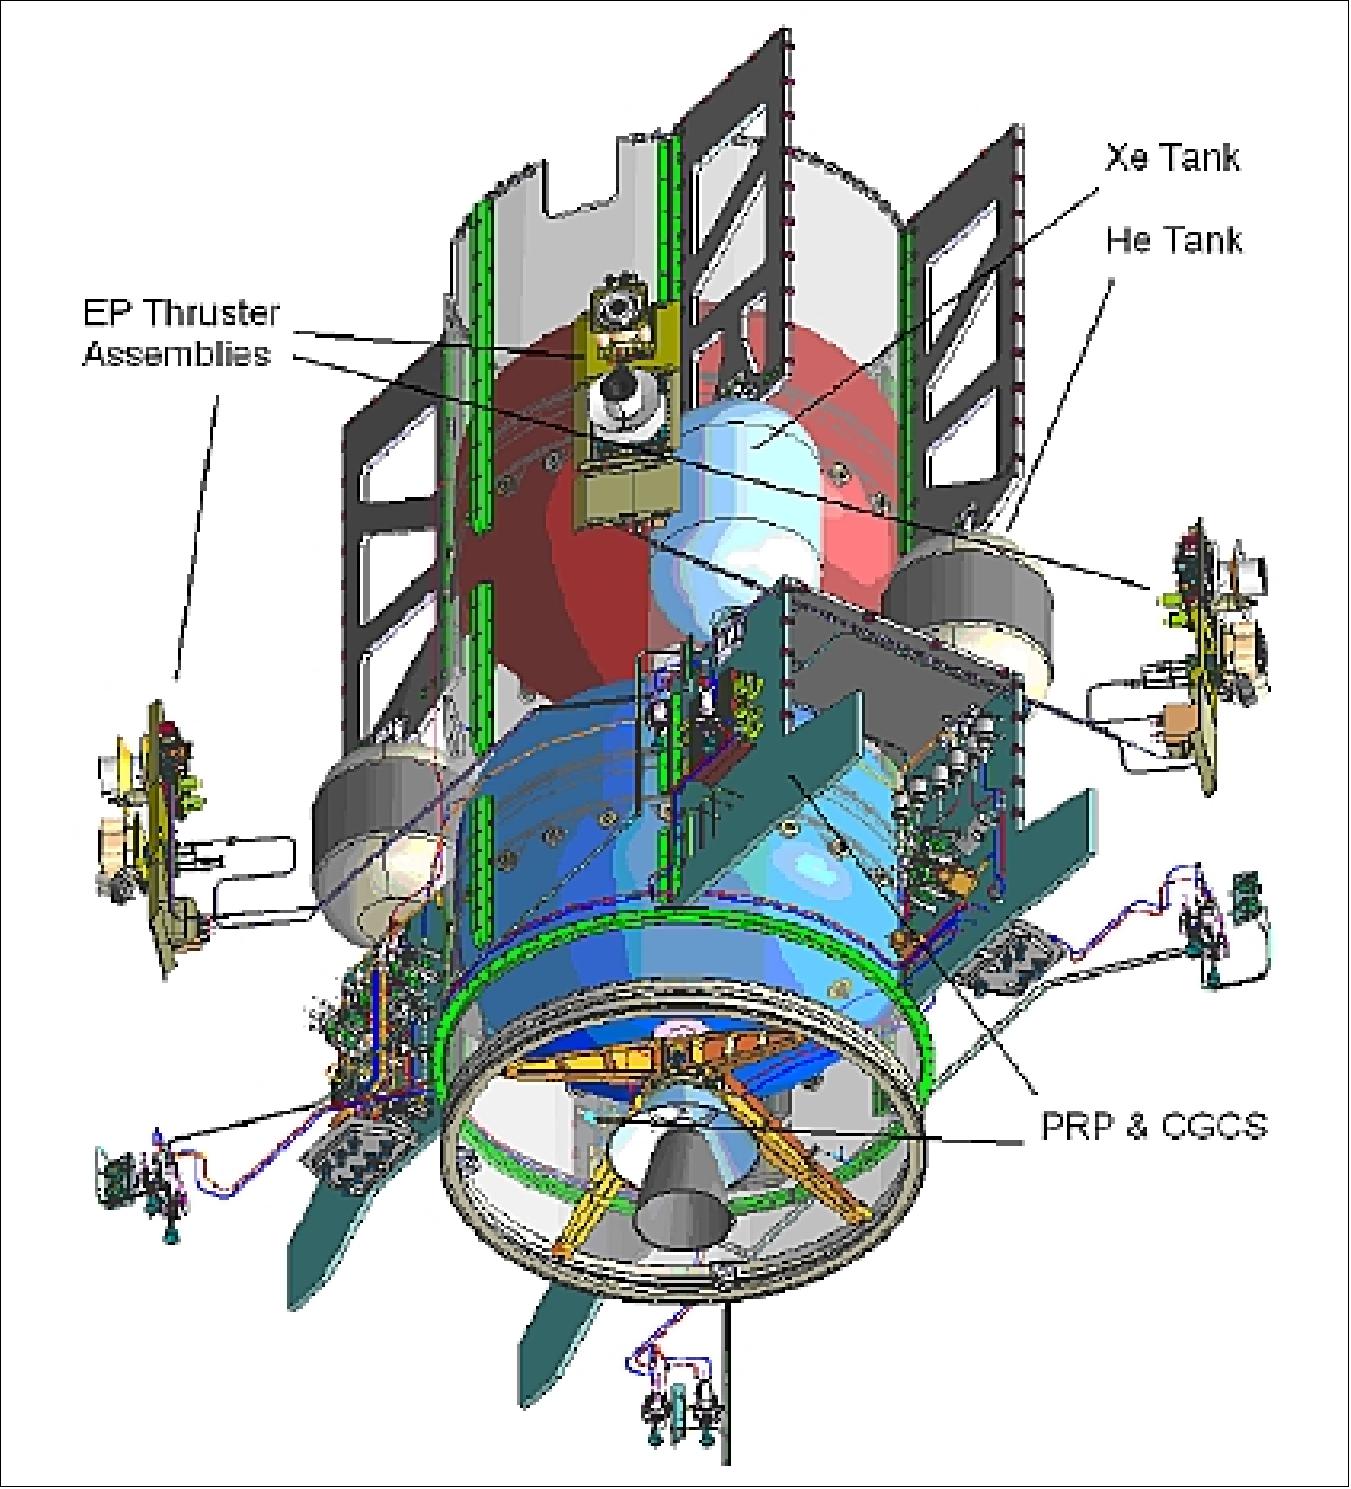 Figure 15: Layout of the EPPS and CPPS on the SGEO platform (image credit: SGEO consortium)